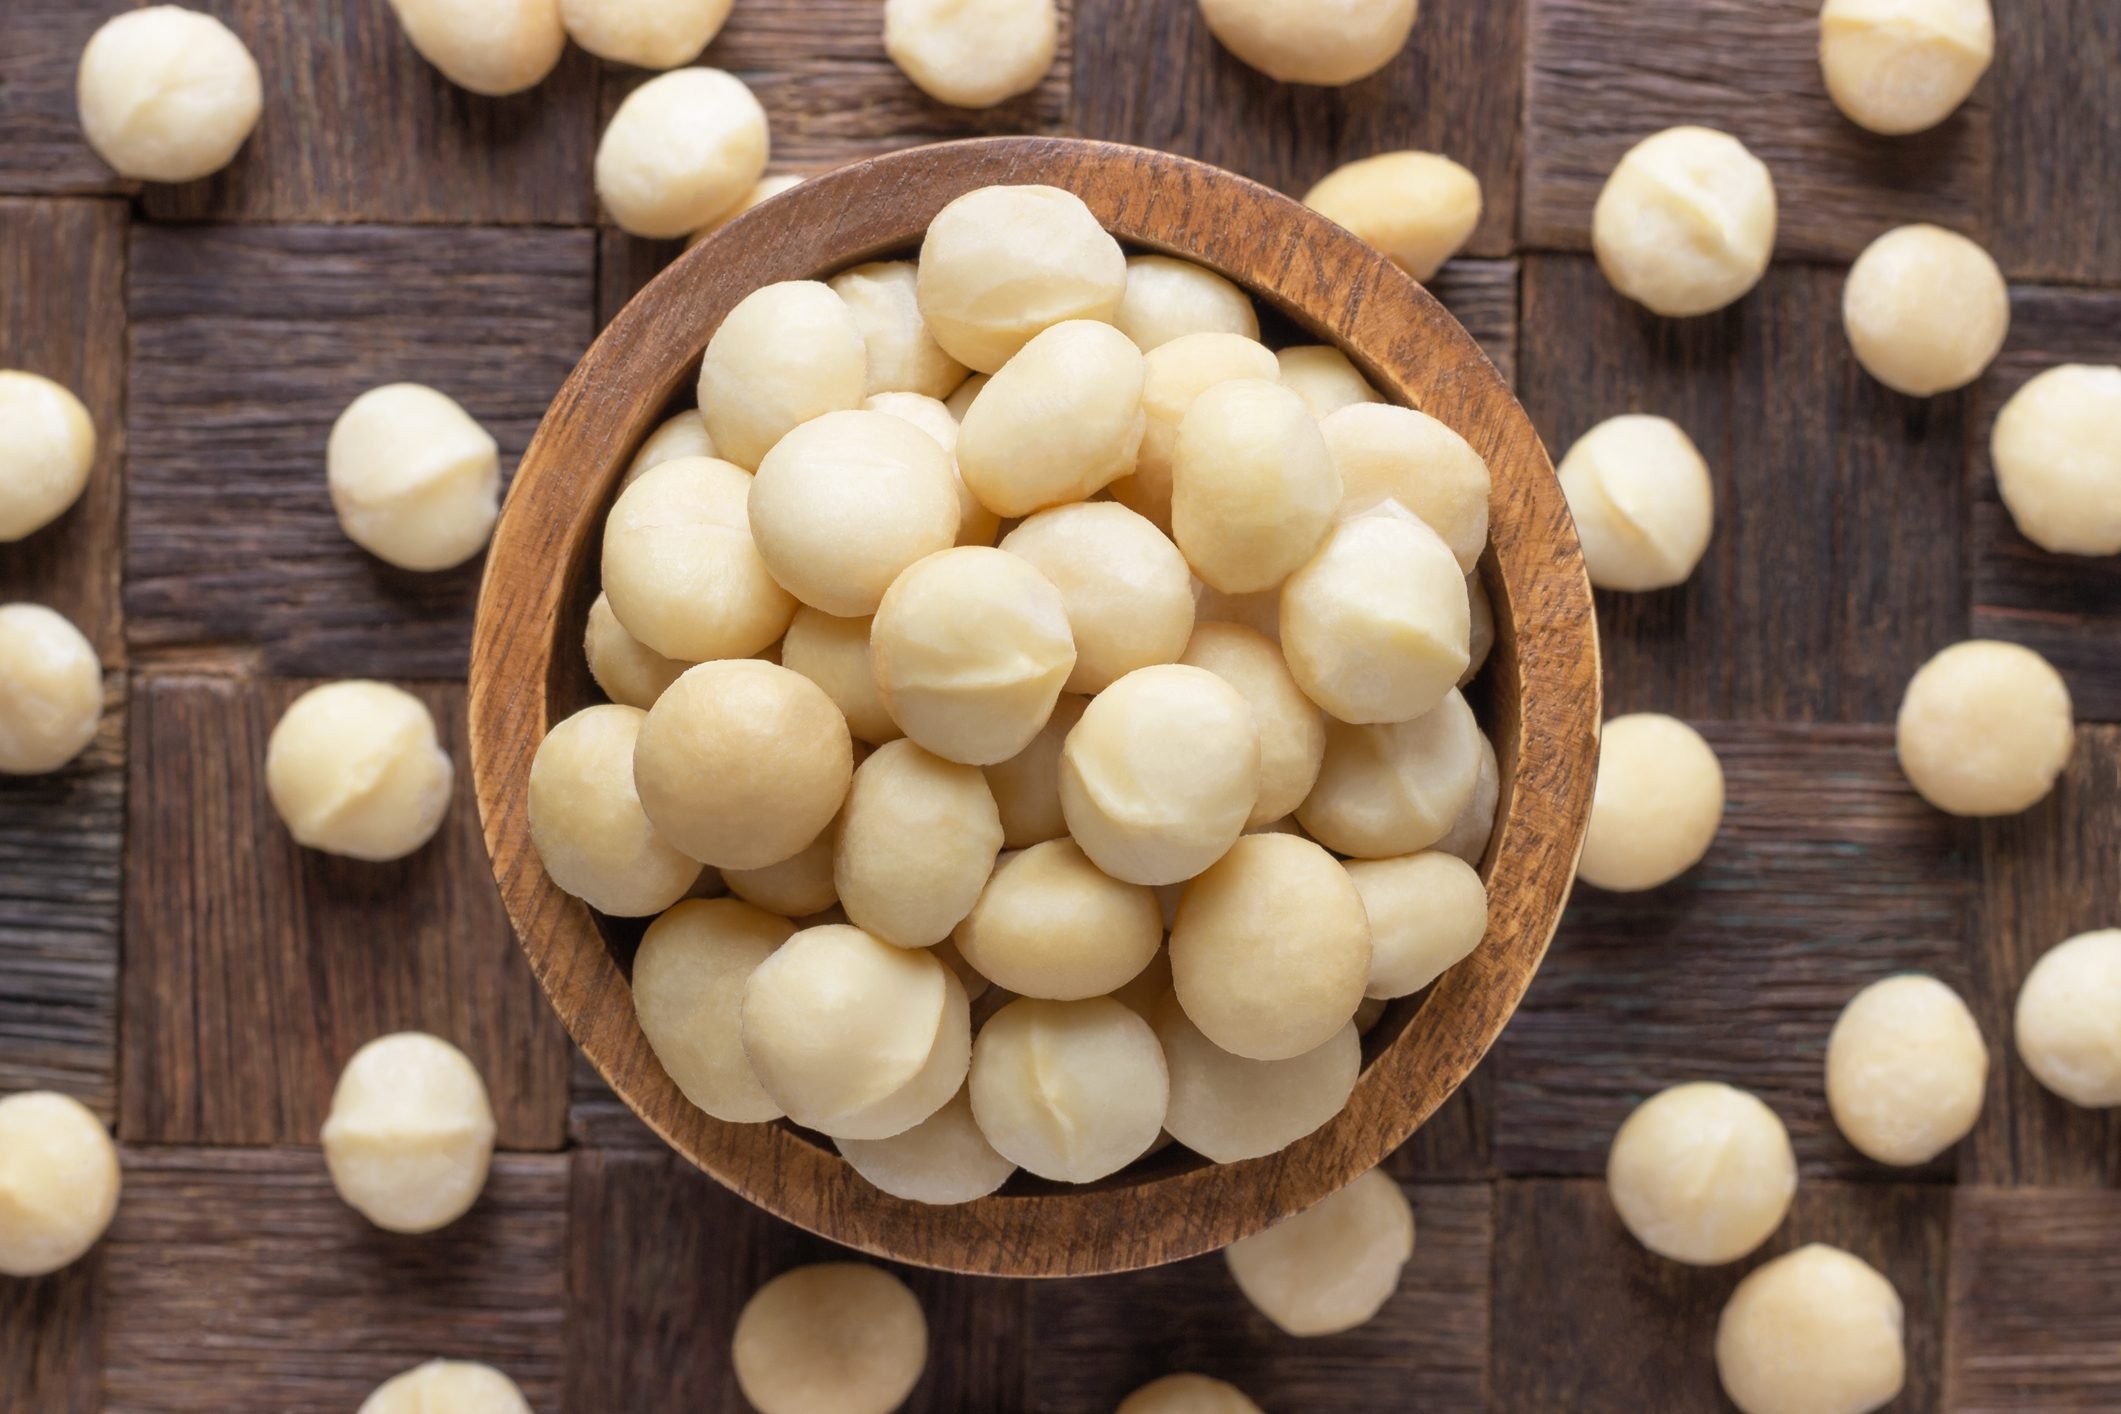 Are Macadamia Nuts Good for You? Their Nutrition, Benefits, and More